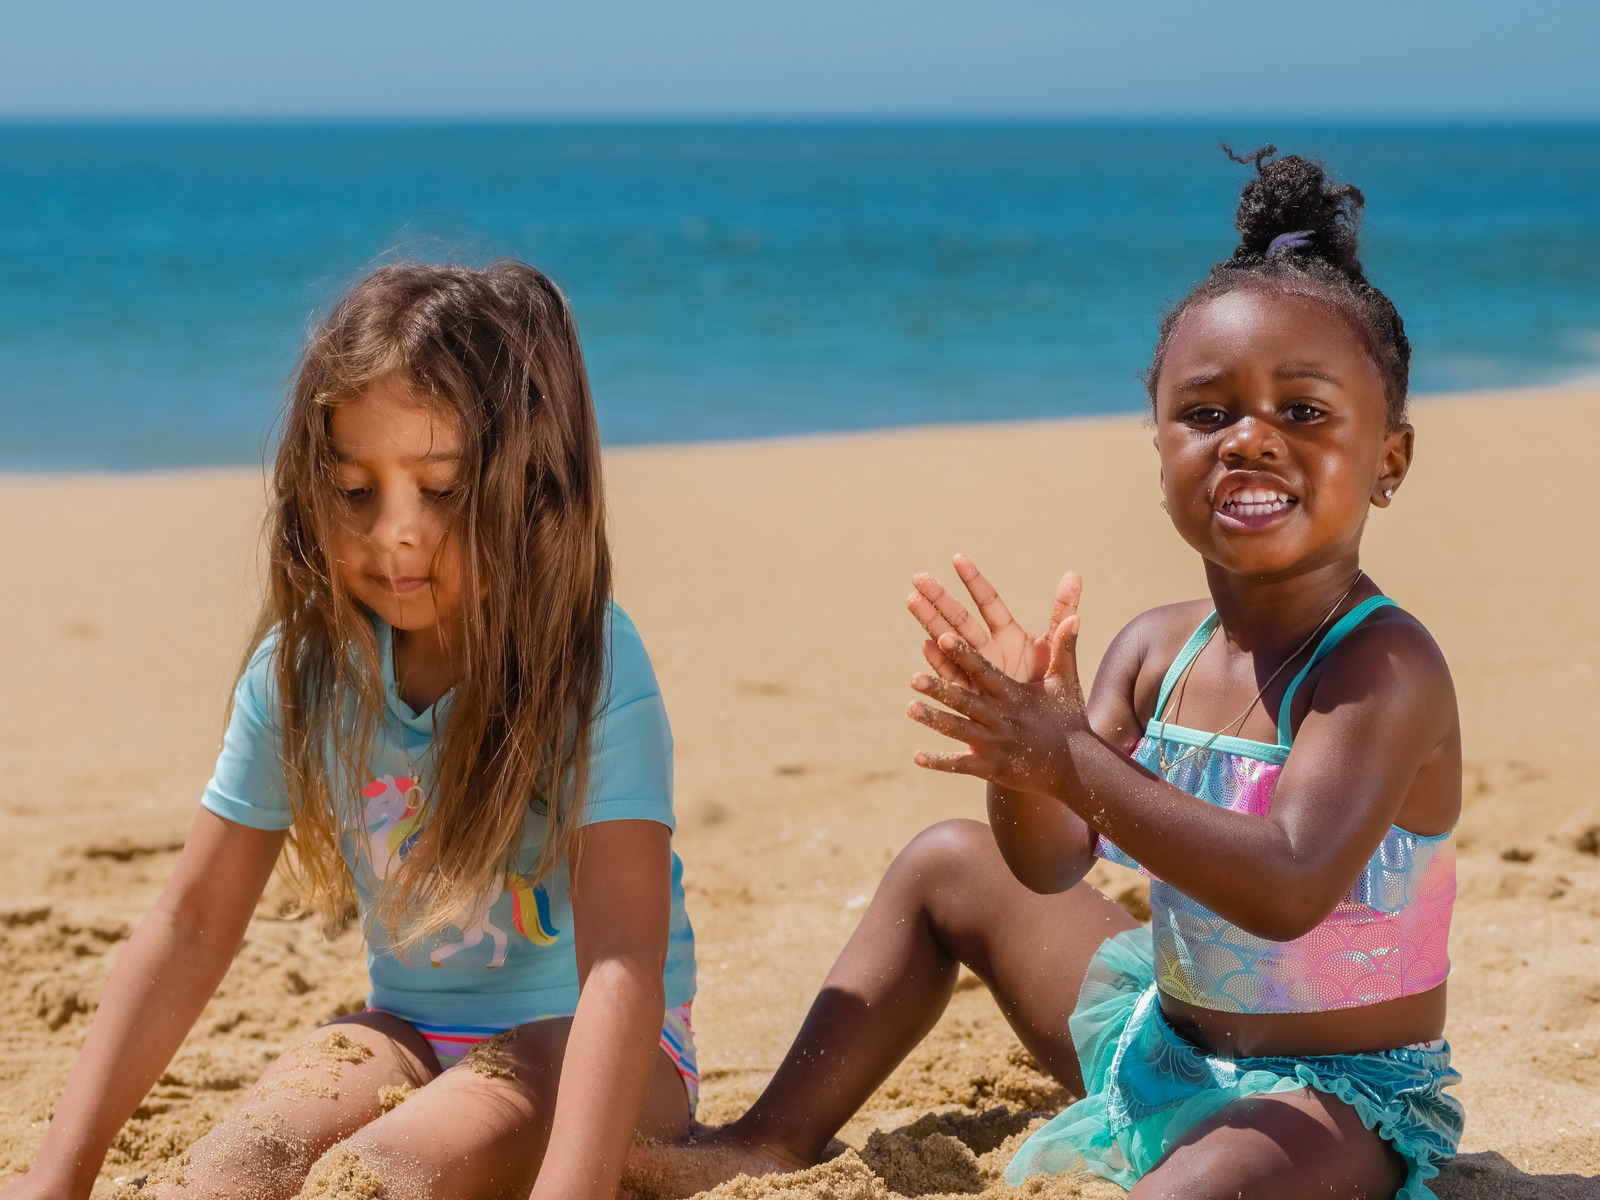 Two Little Girls Playing on Beach Sand - Photos by Canva